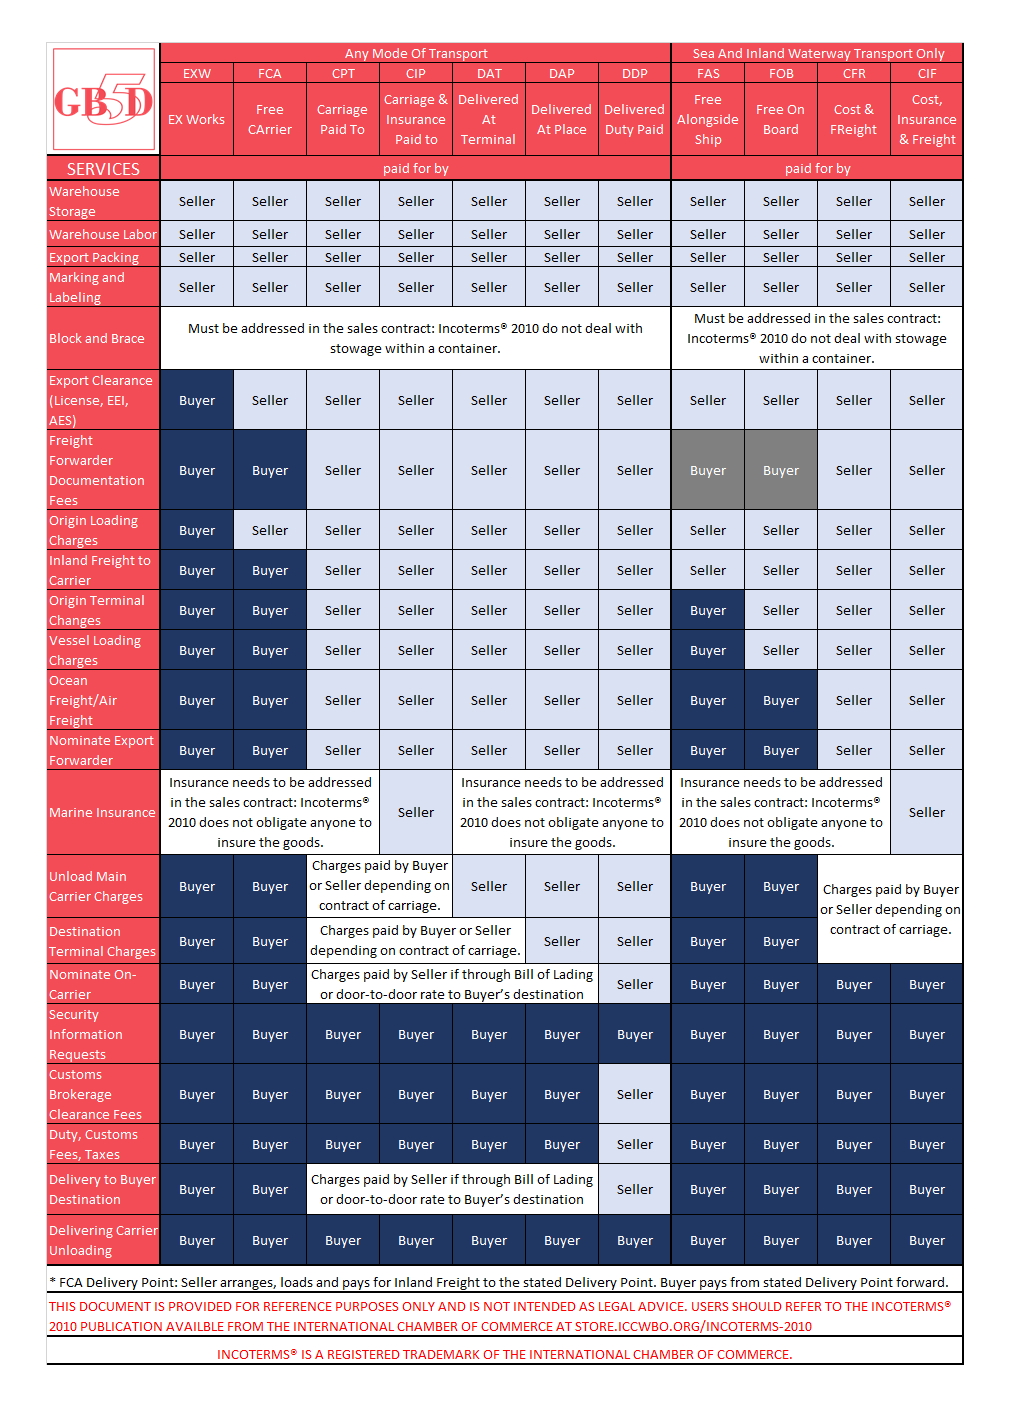 INCOTERMS 2010 REFERENCE